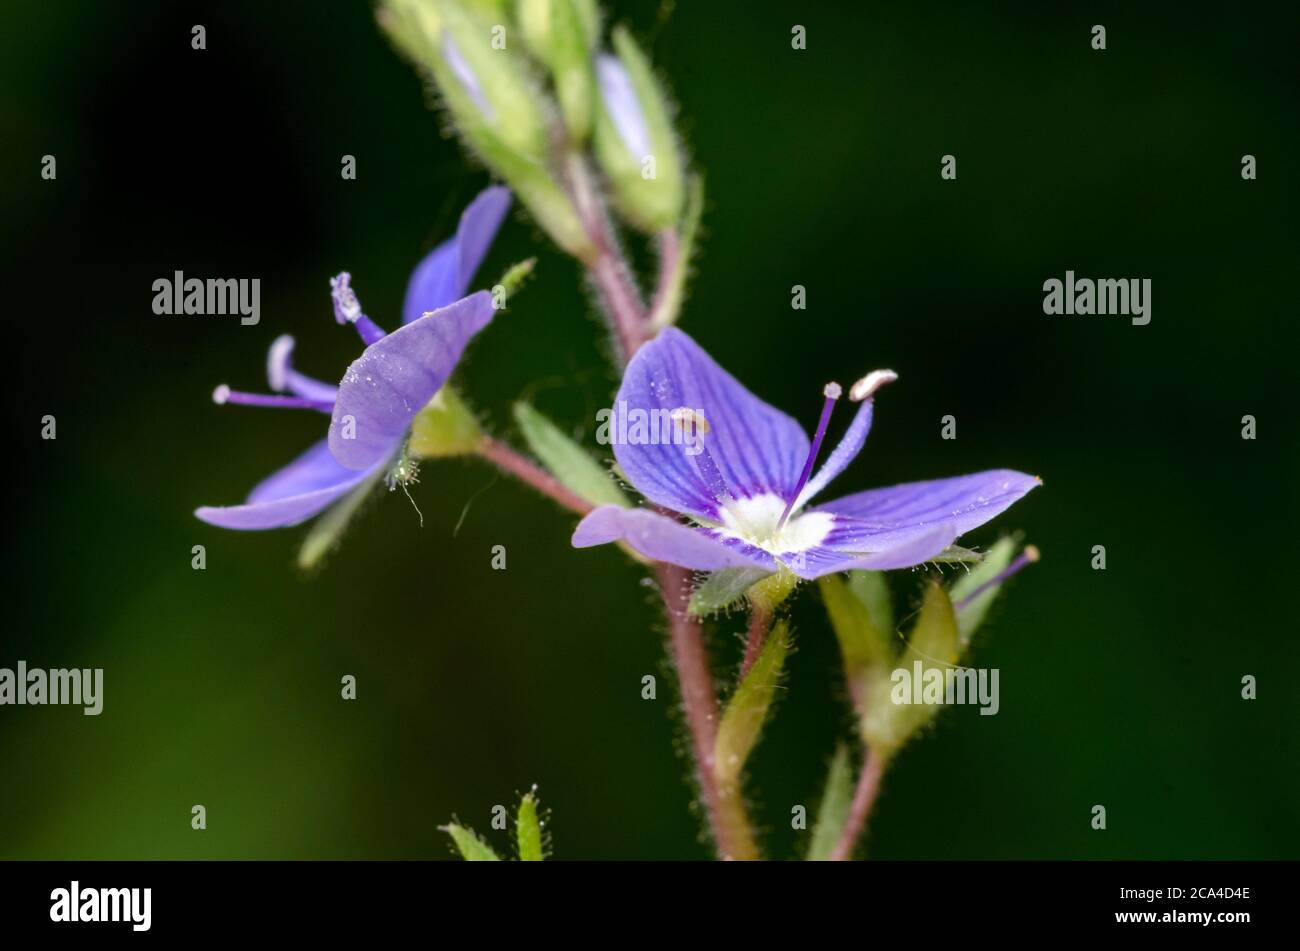 Veronica officinalis, Veronica chamaedrys, Speedwell flowers also known as bird's eye or gypsyweed, close-up, Germany, Western Europe Stock Photo